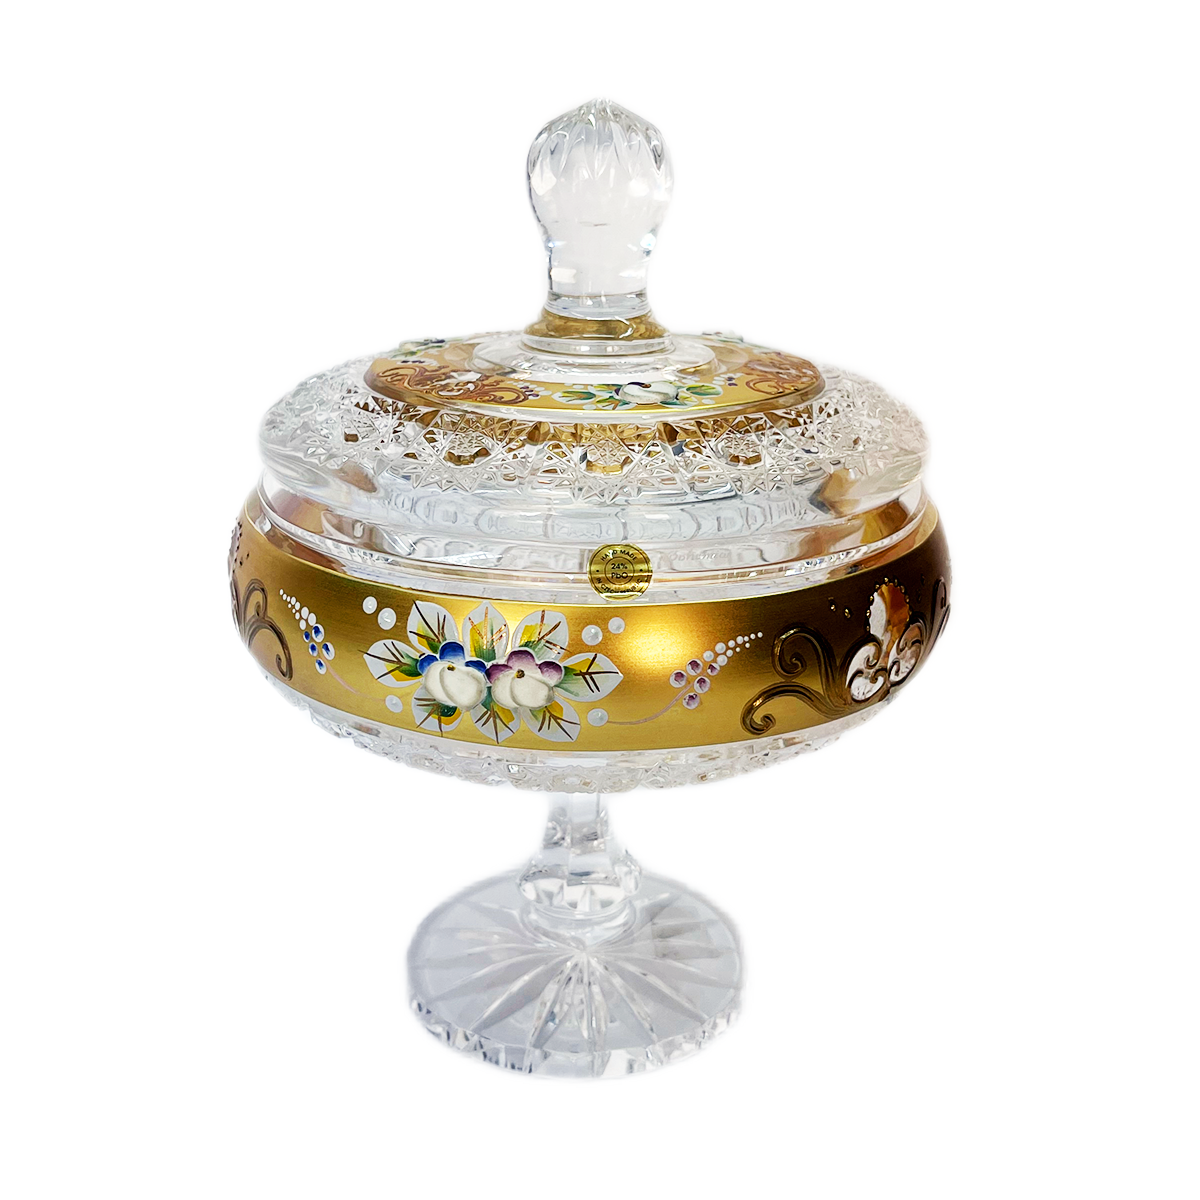 Bohemia Crystal Bonbonniere with Cover and Base -Hand Cut -19.5 cm -Gold